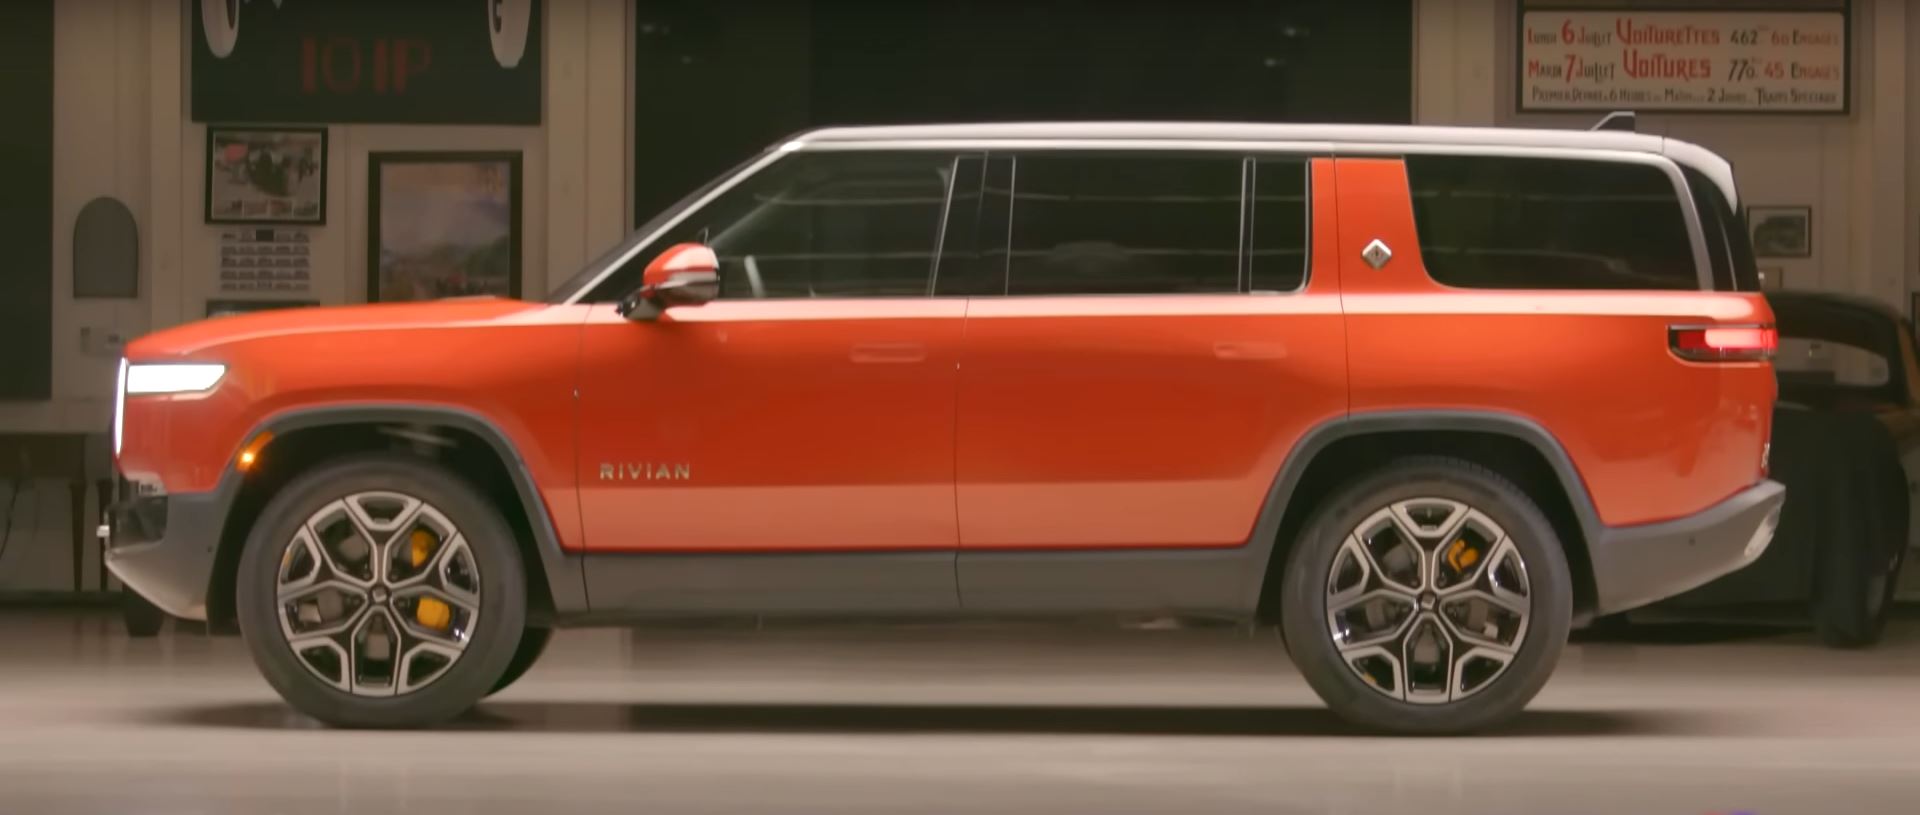 Jay Leno Likes the Rivian R1T, but Here He is Driving the R1S Together ...